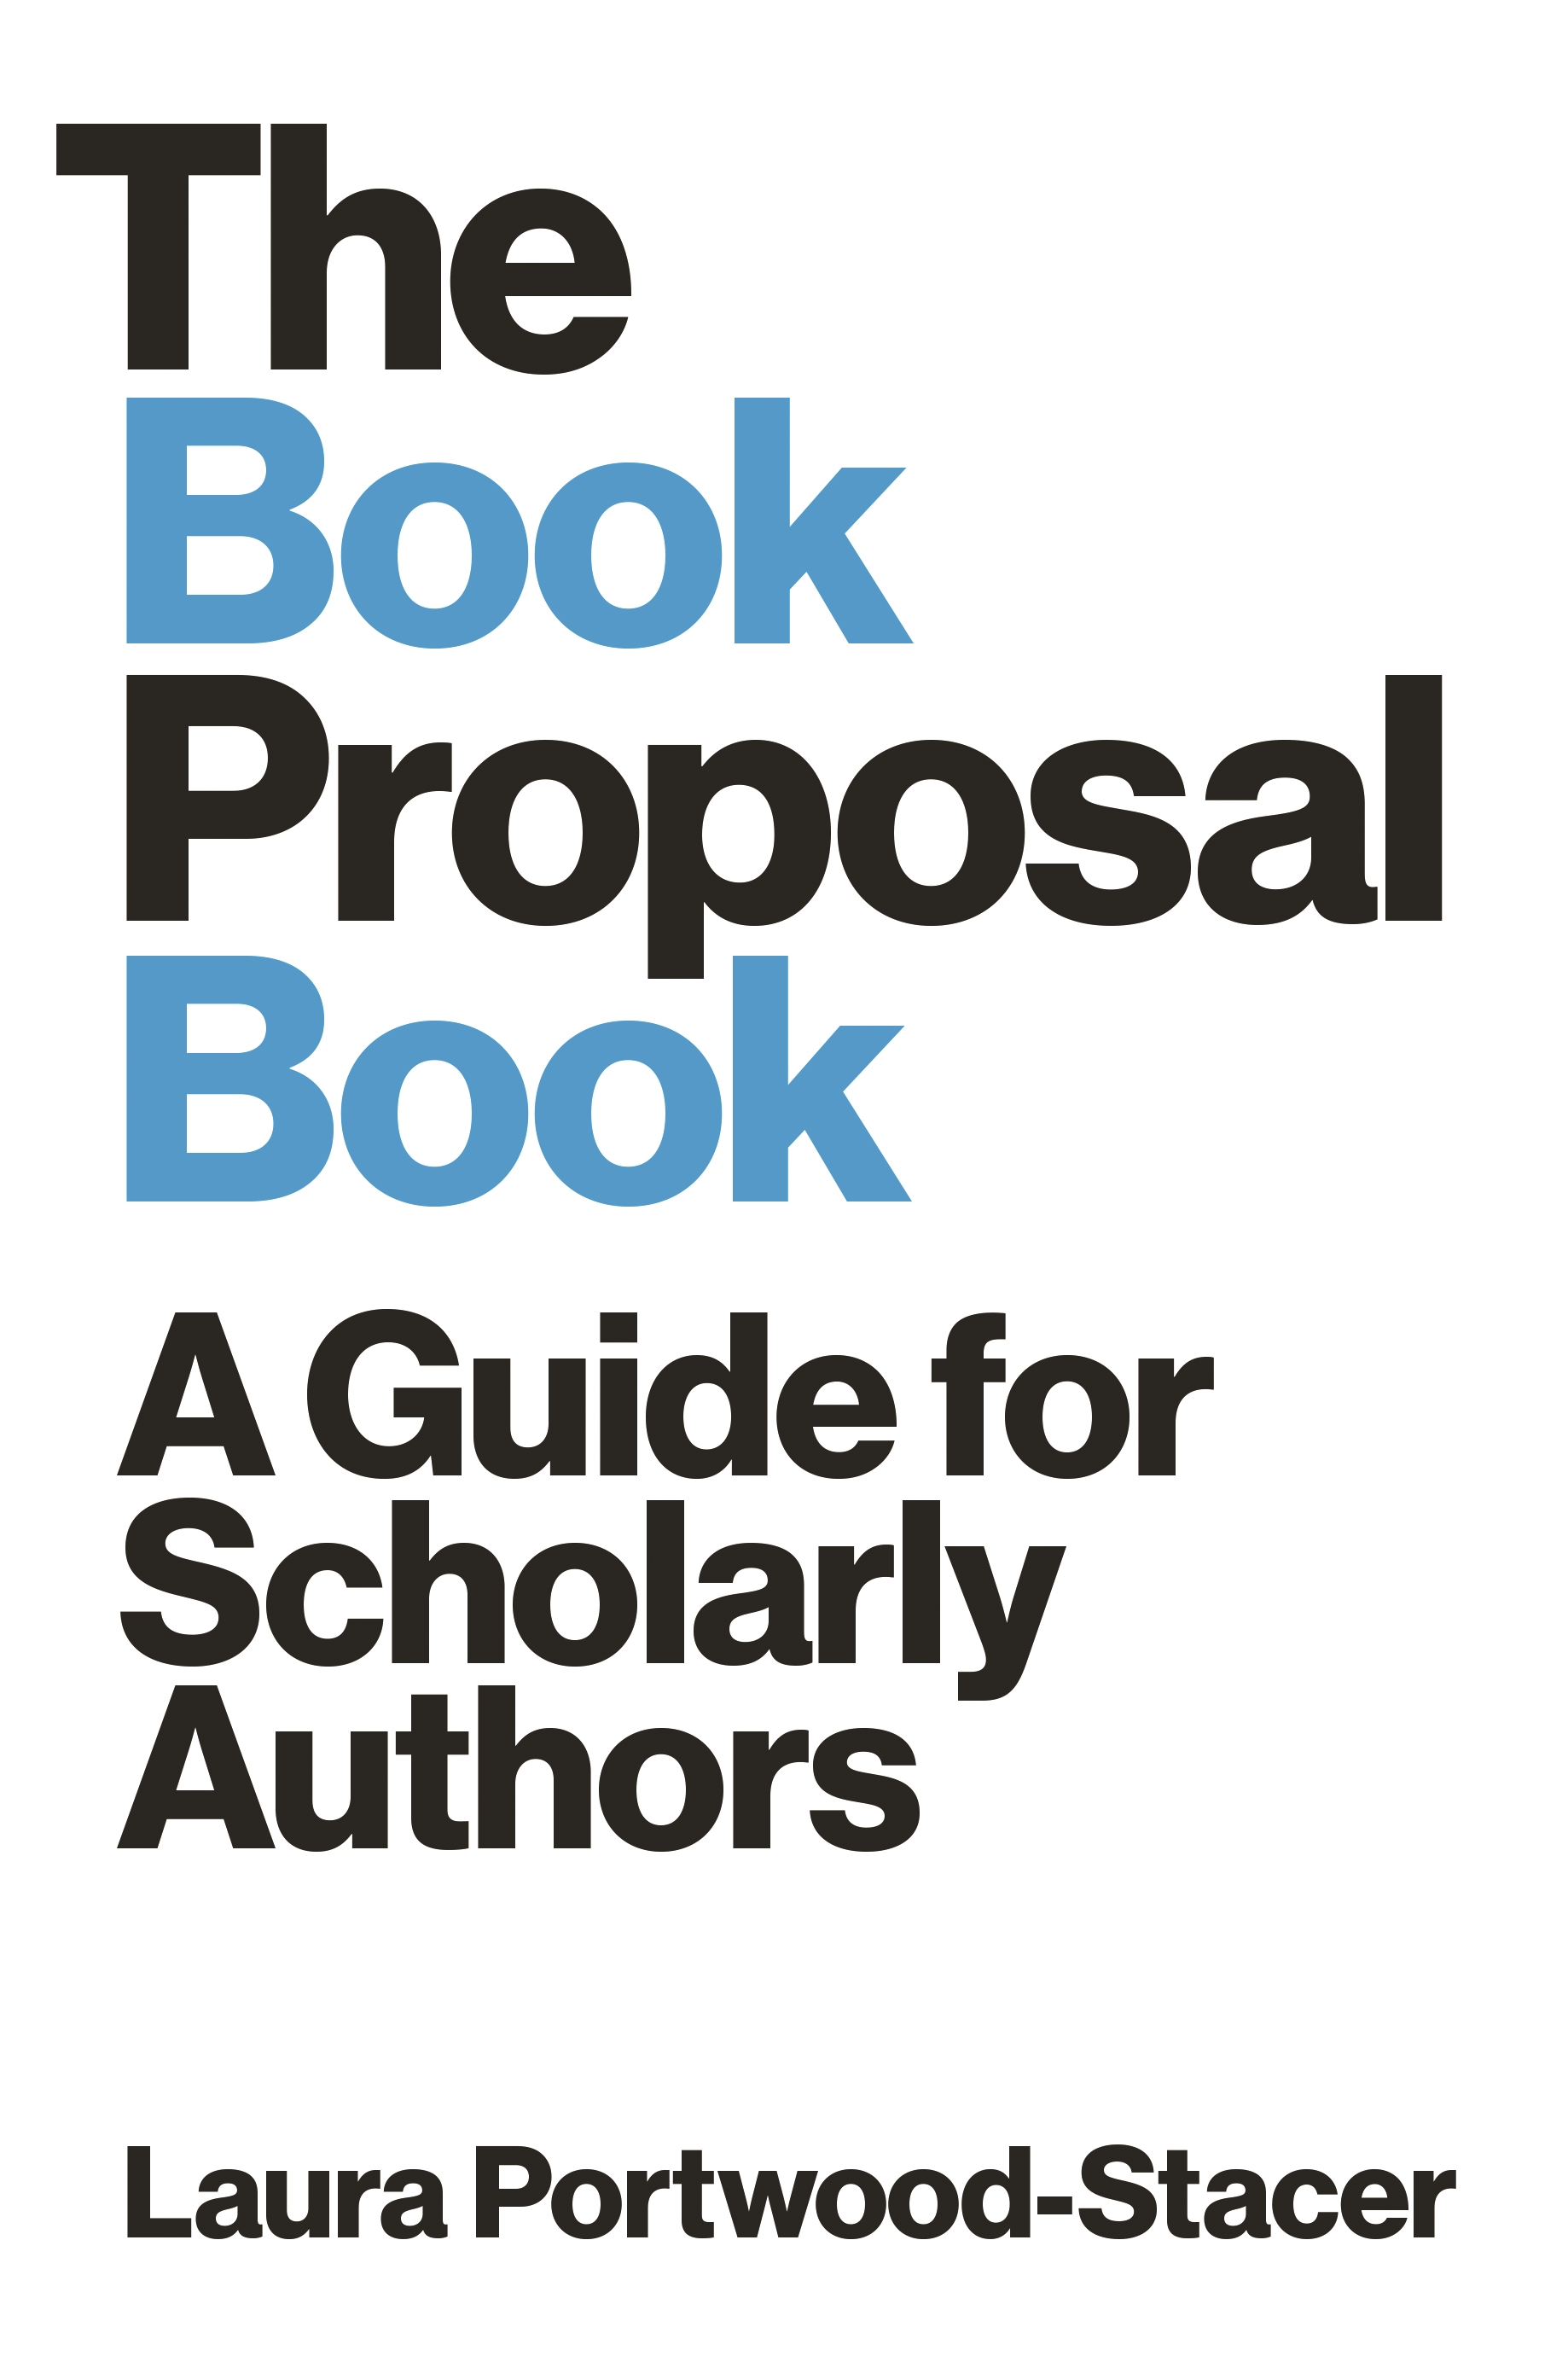 Book Writing Coach: Learn How to Write a Book Proposal from Book